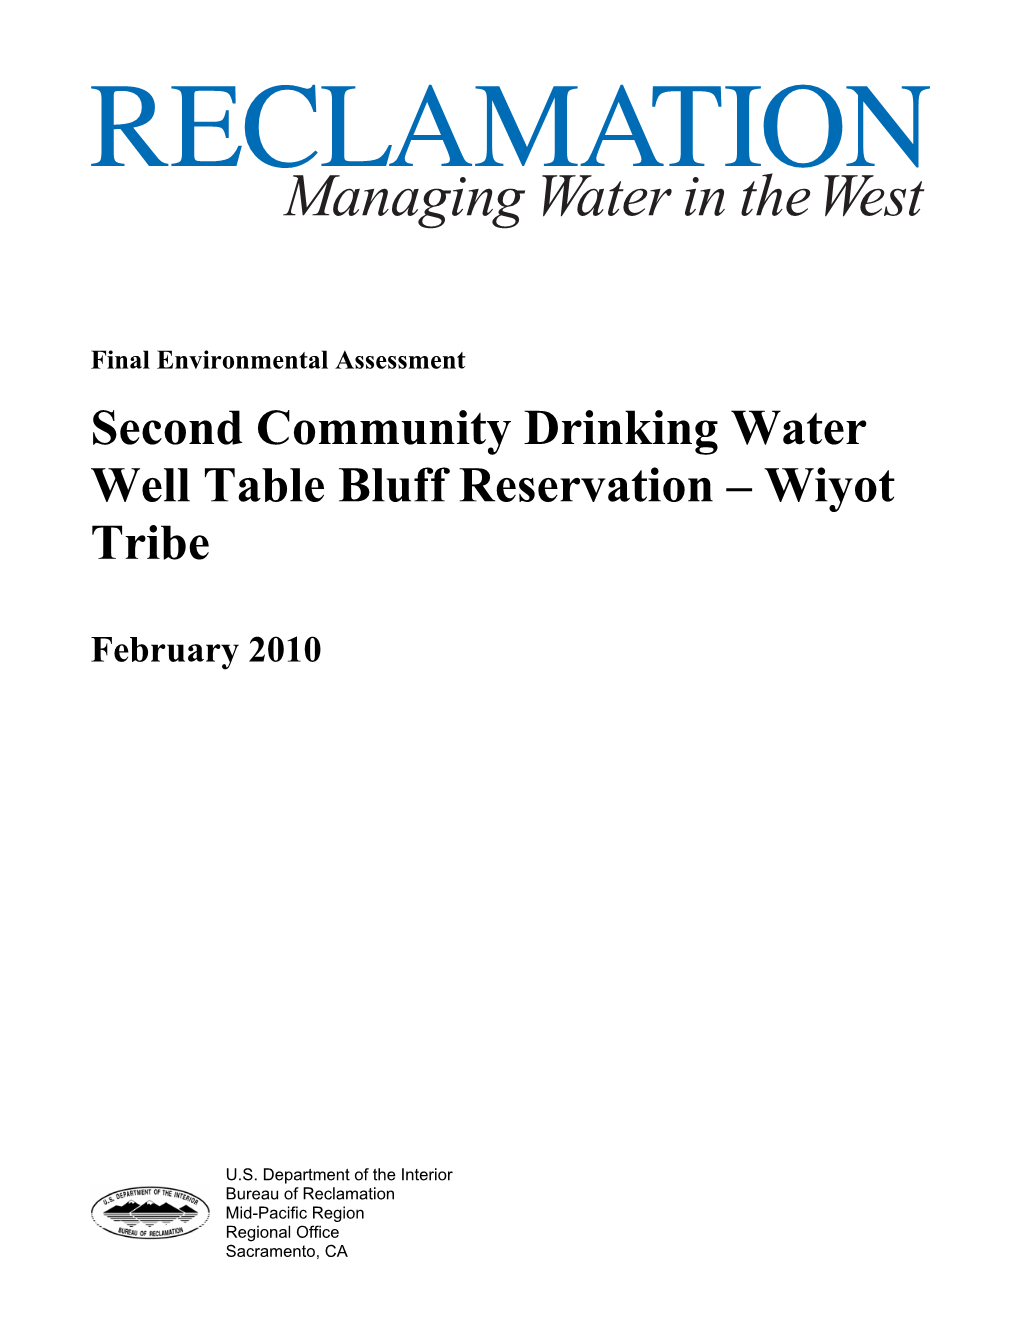 Second Community Drinking Water Well Table Bluff Reservation – Wiyot Tribe